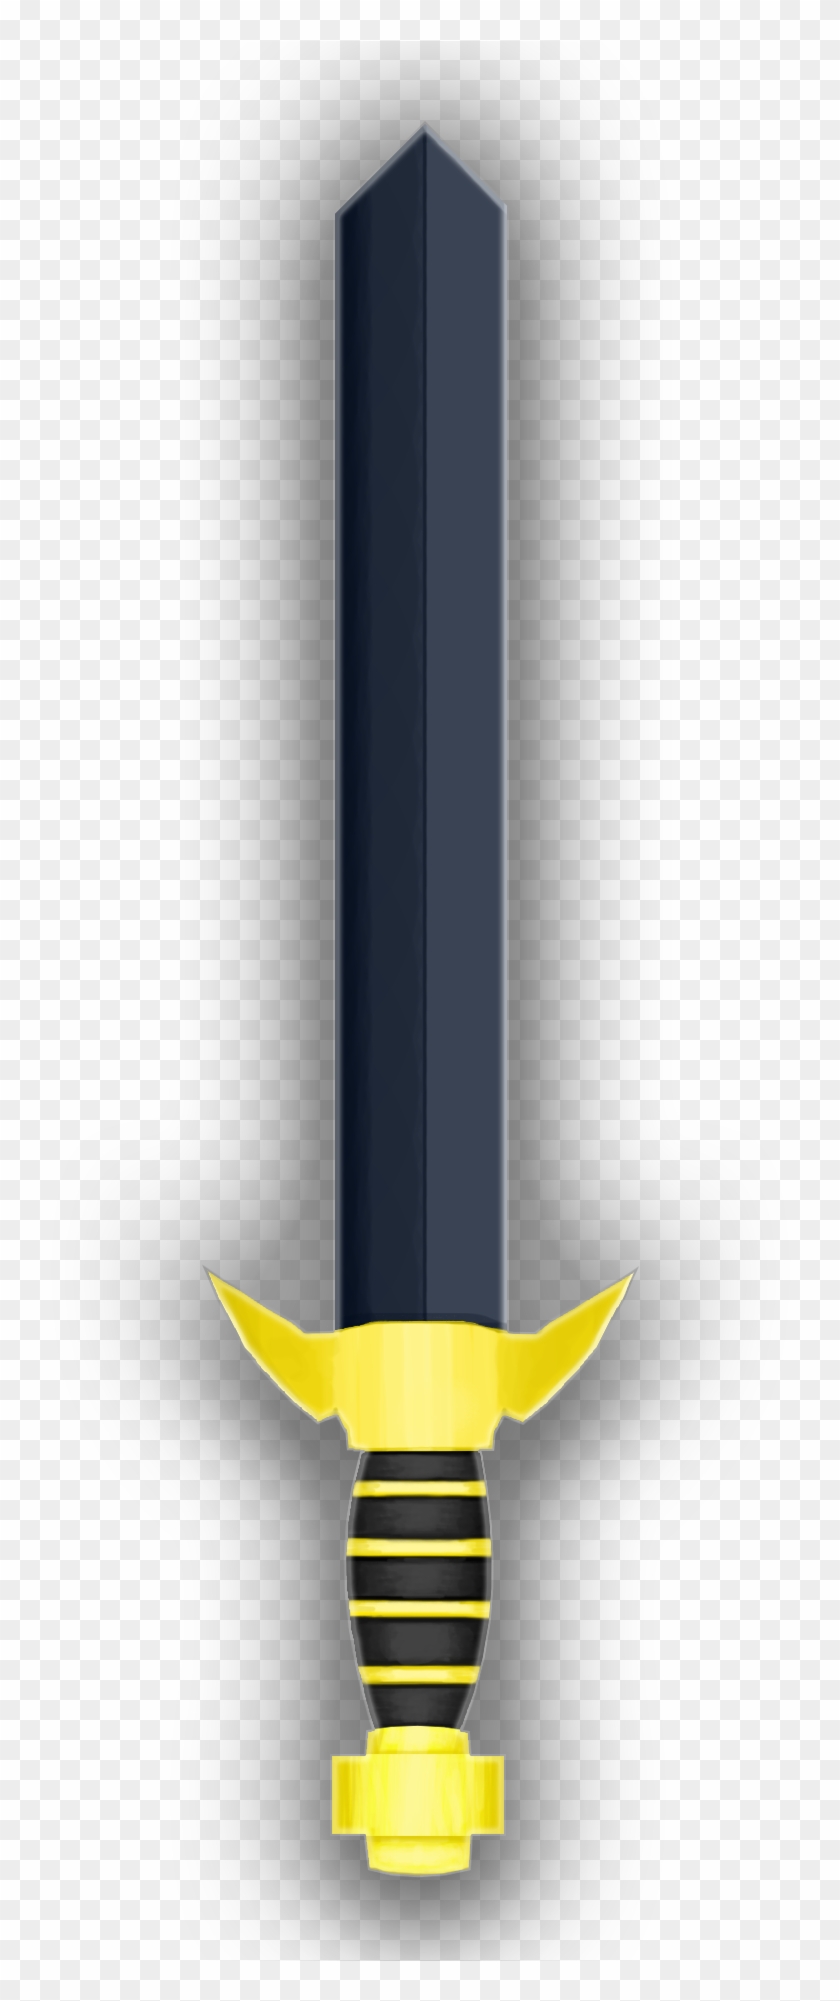 Preview - Sword Clipart